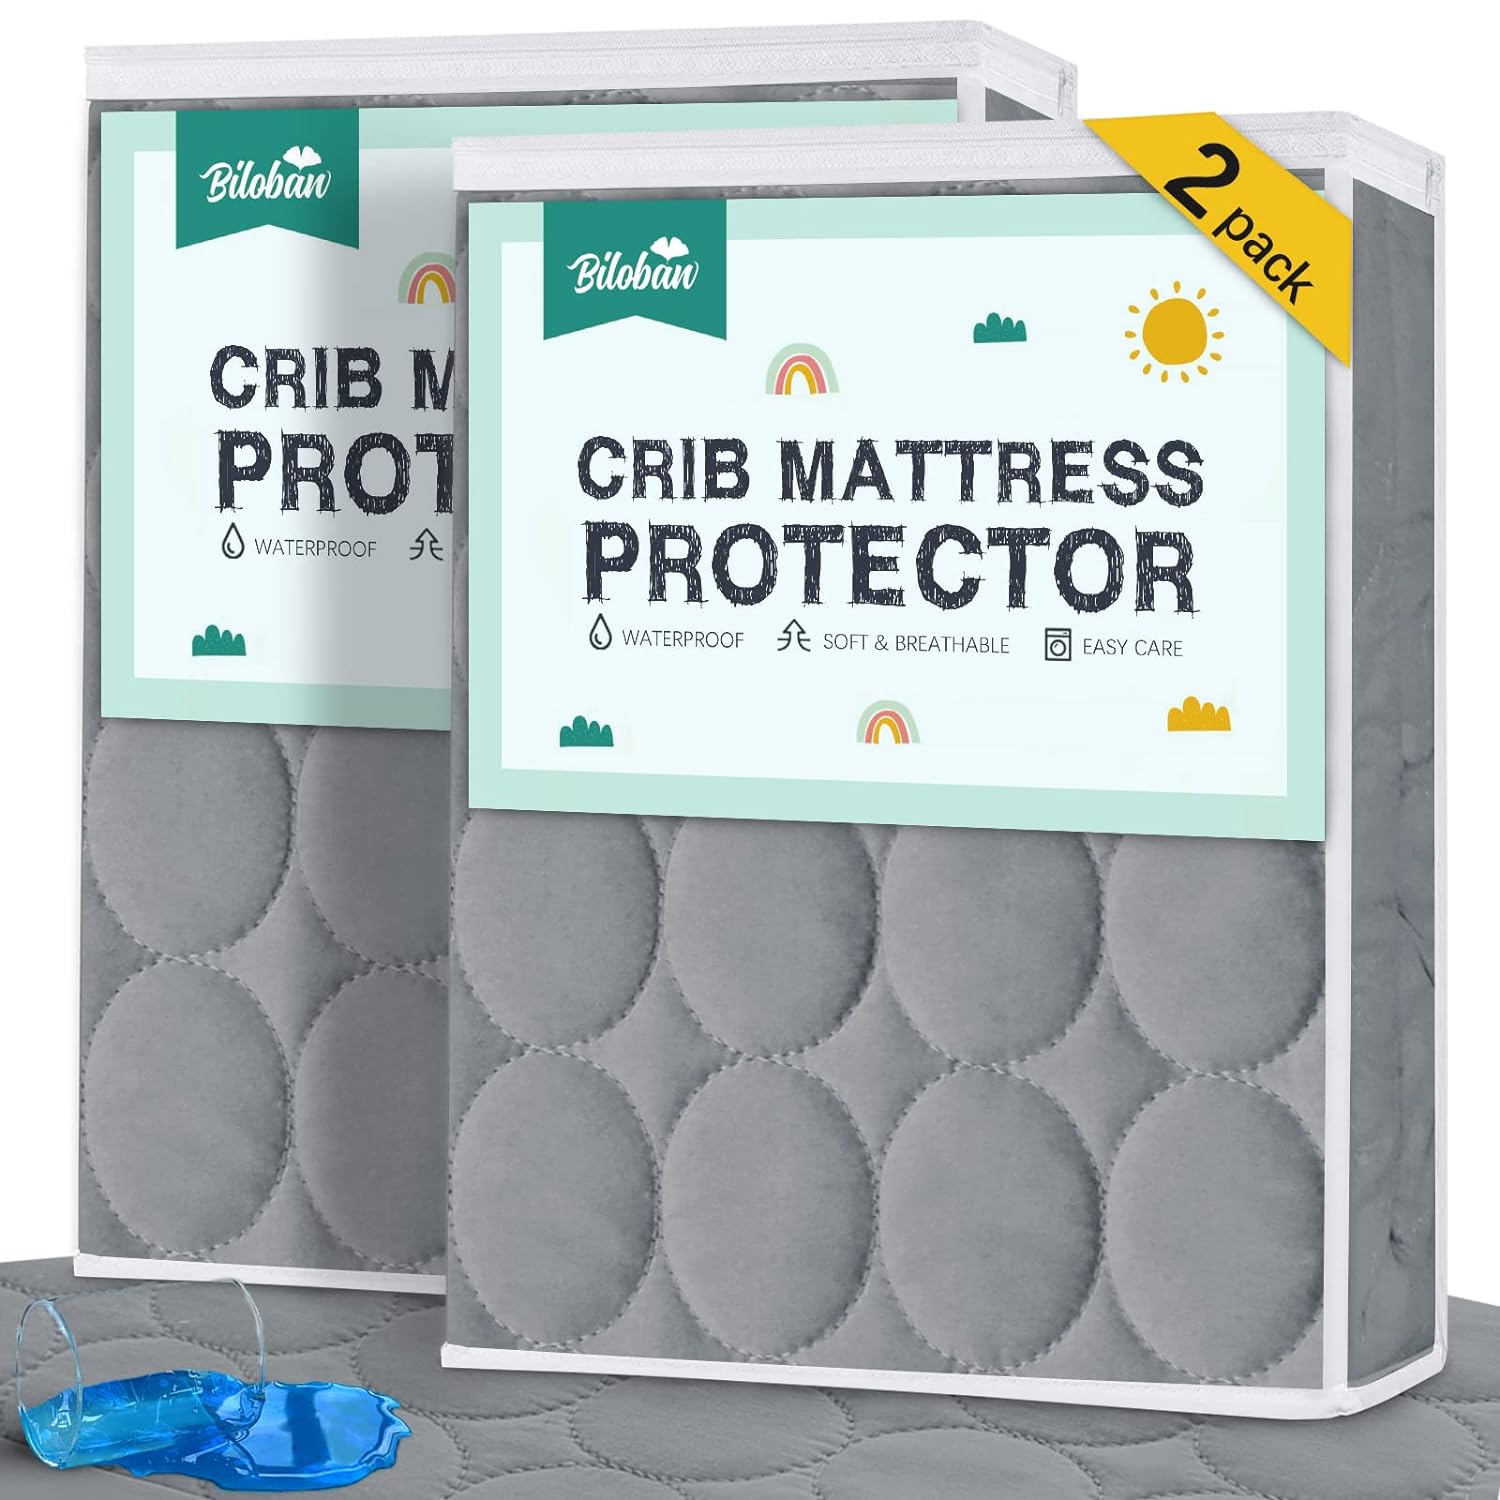 Crib Mattress Protector/ Pad Cover - 2 Pack, Quilted Microfiber, Waterproof (for Standard Crib/ Toddler Bed), Grey - Biloban Online Store